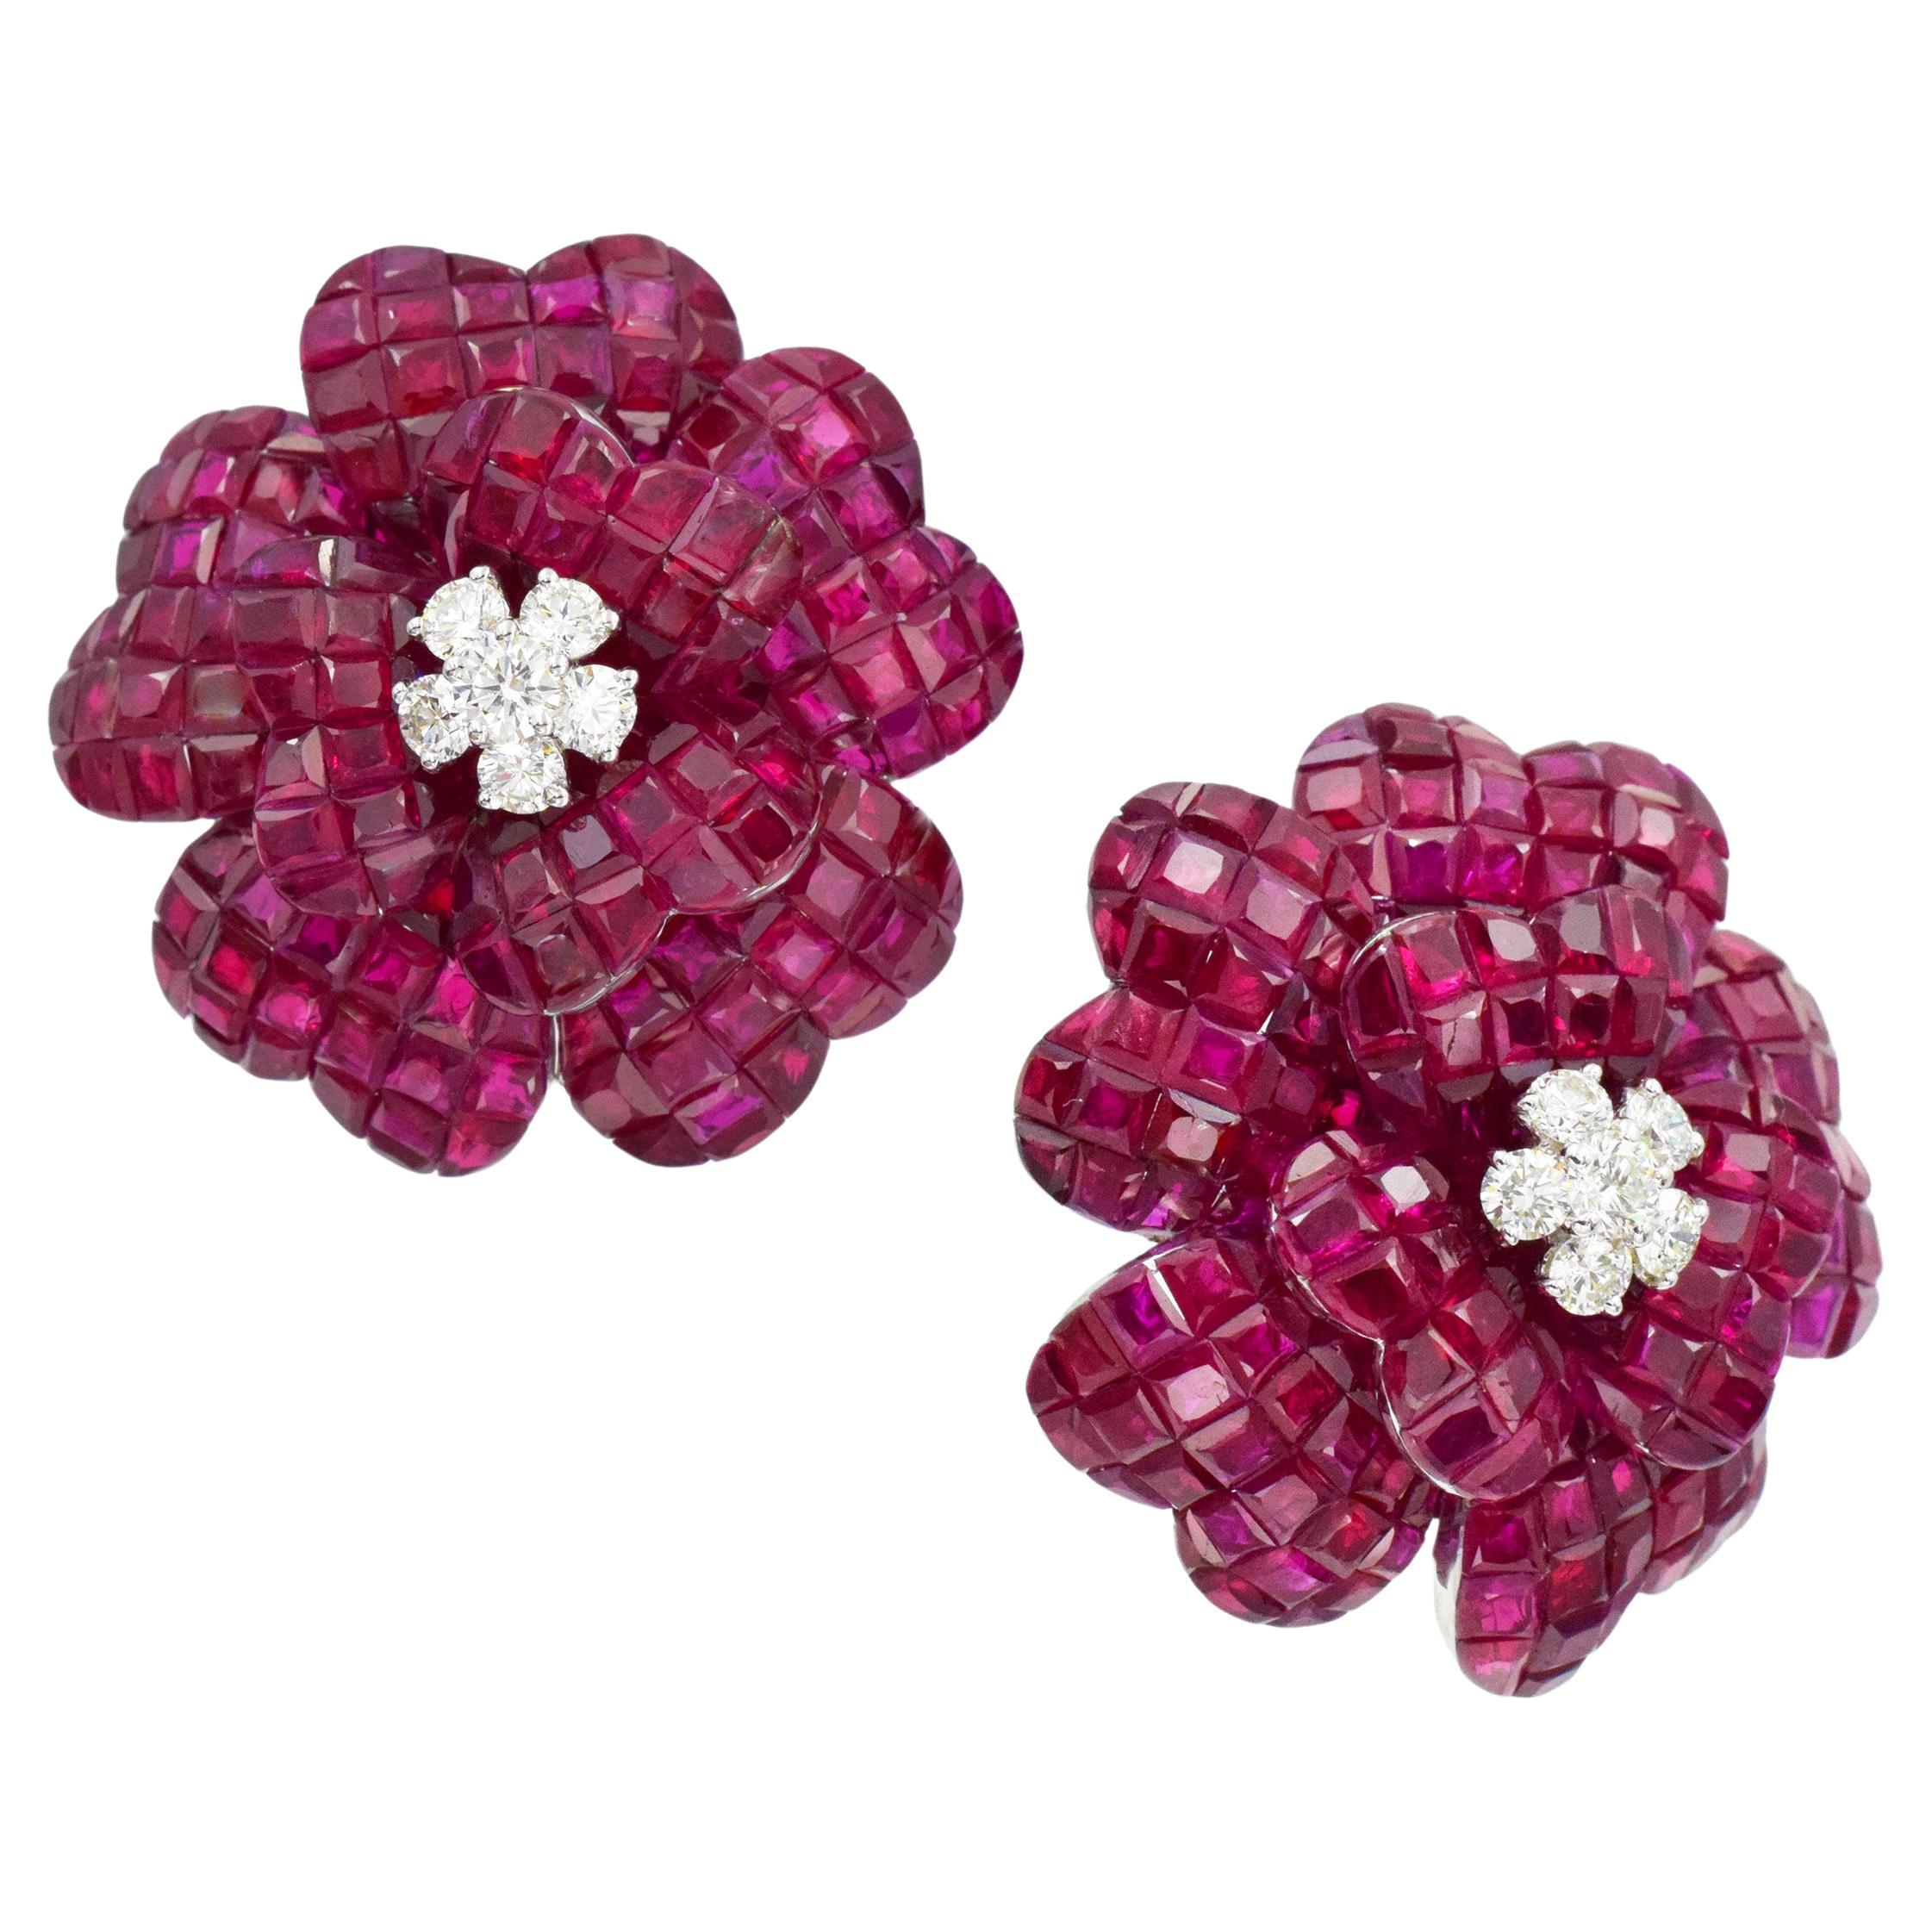 Blooming flower ruby and diamond earrings. Crafted in 18k white gold. Each flower consists of five larger and three smaller petals, each invisibly set with square cut rubies with total weight of 69.45ct. Centers set with total of ten round diamonds